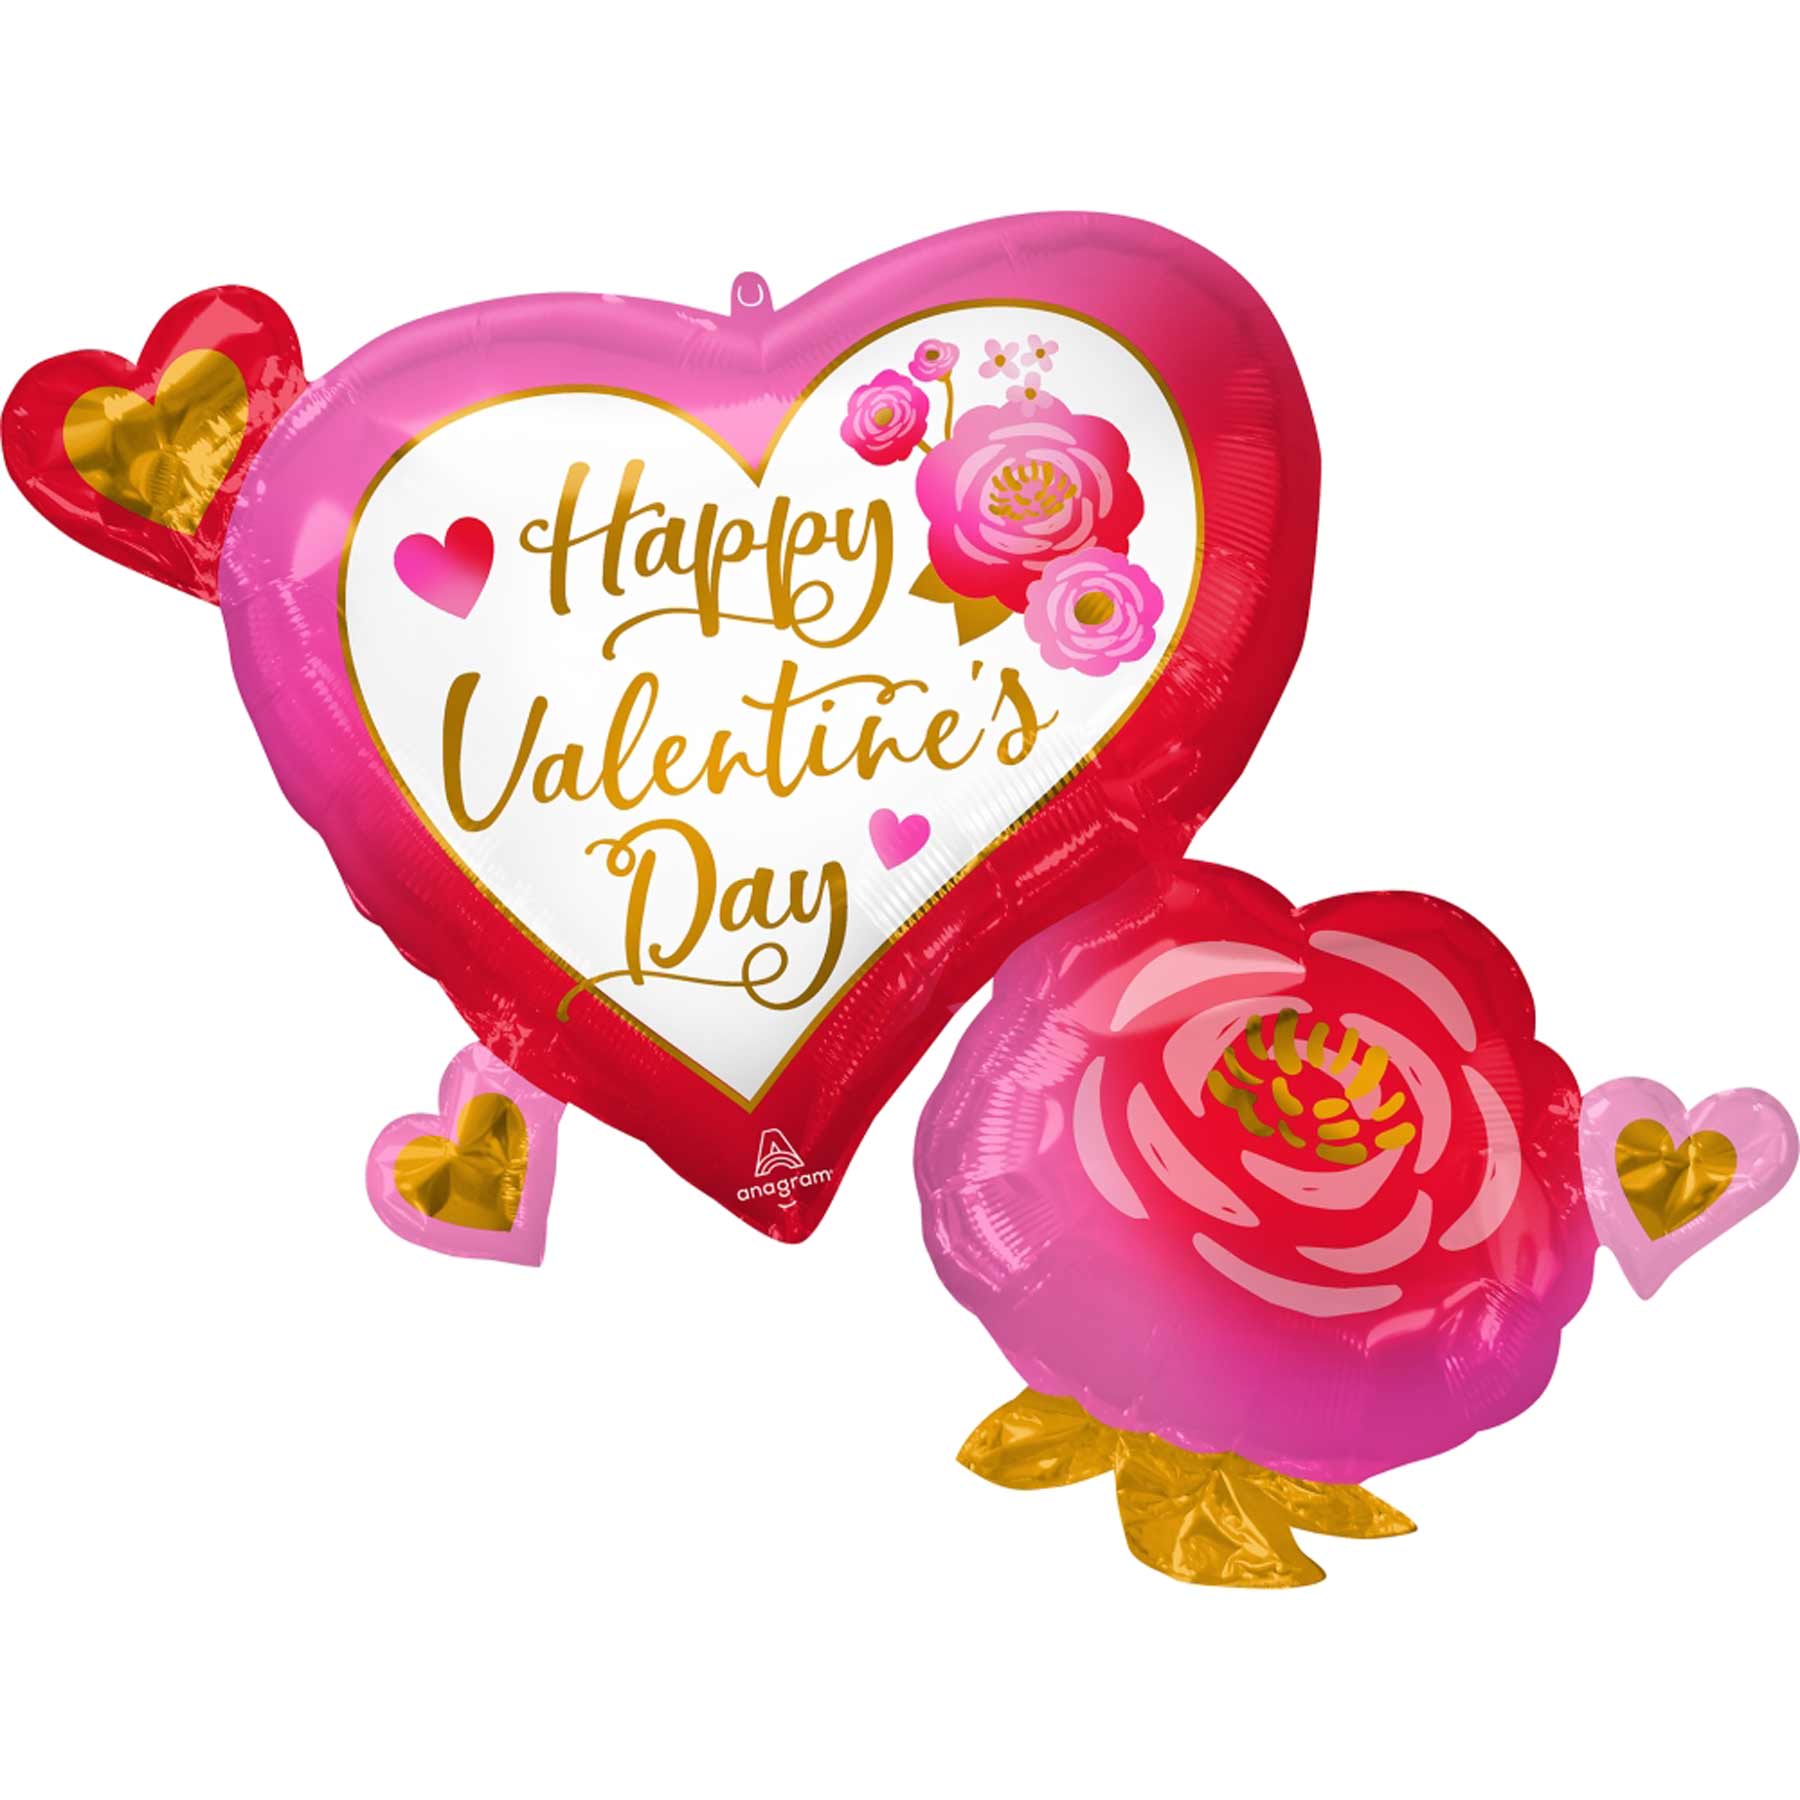 Happy Valentines Day Heart & Rose SuperShape Balloon 81x68cm Balloons & Streamers - Party Centre